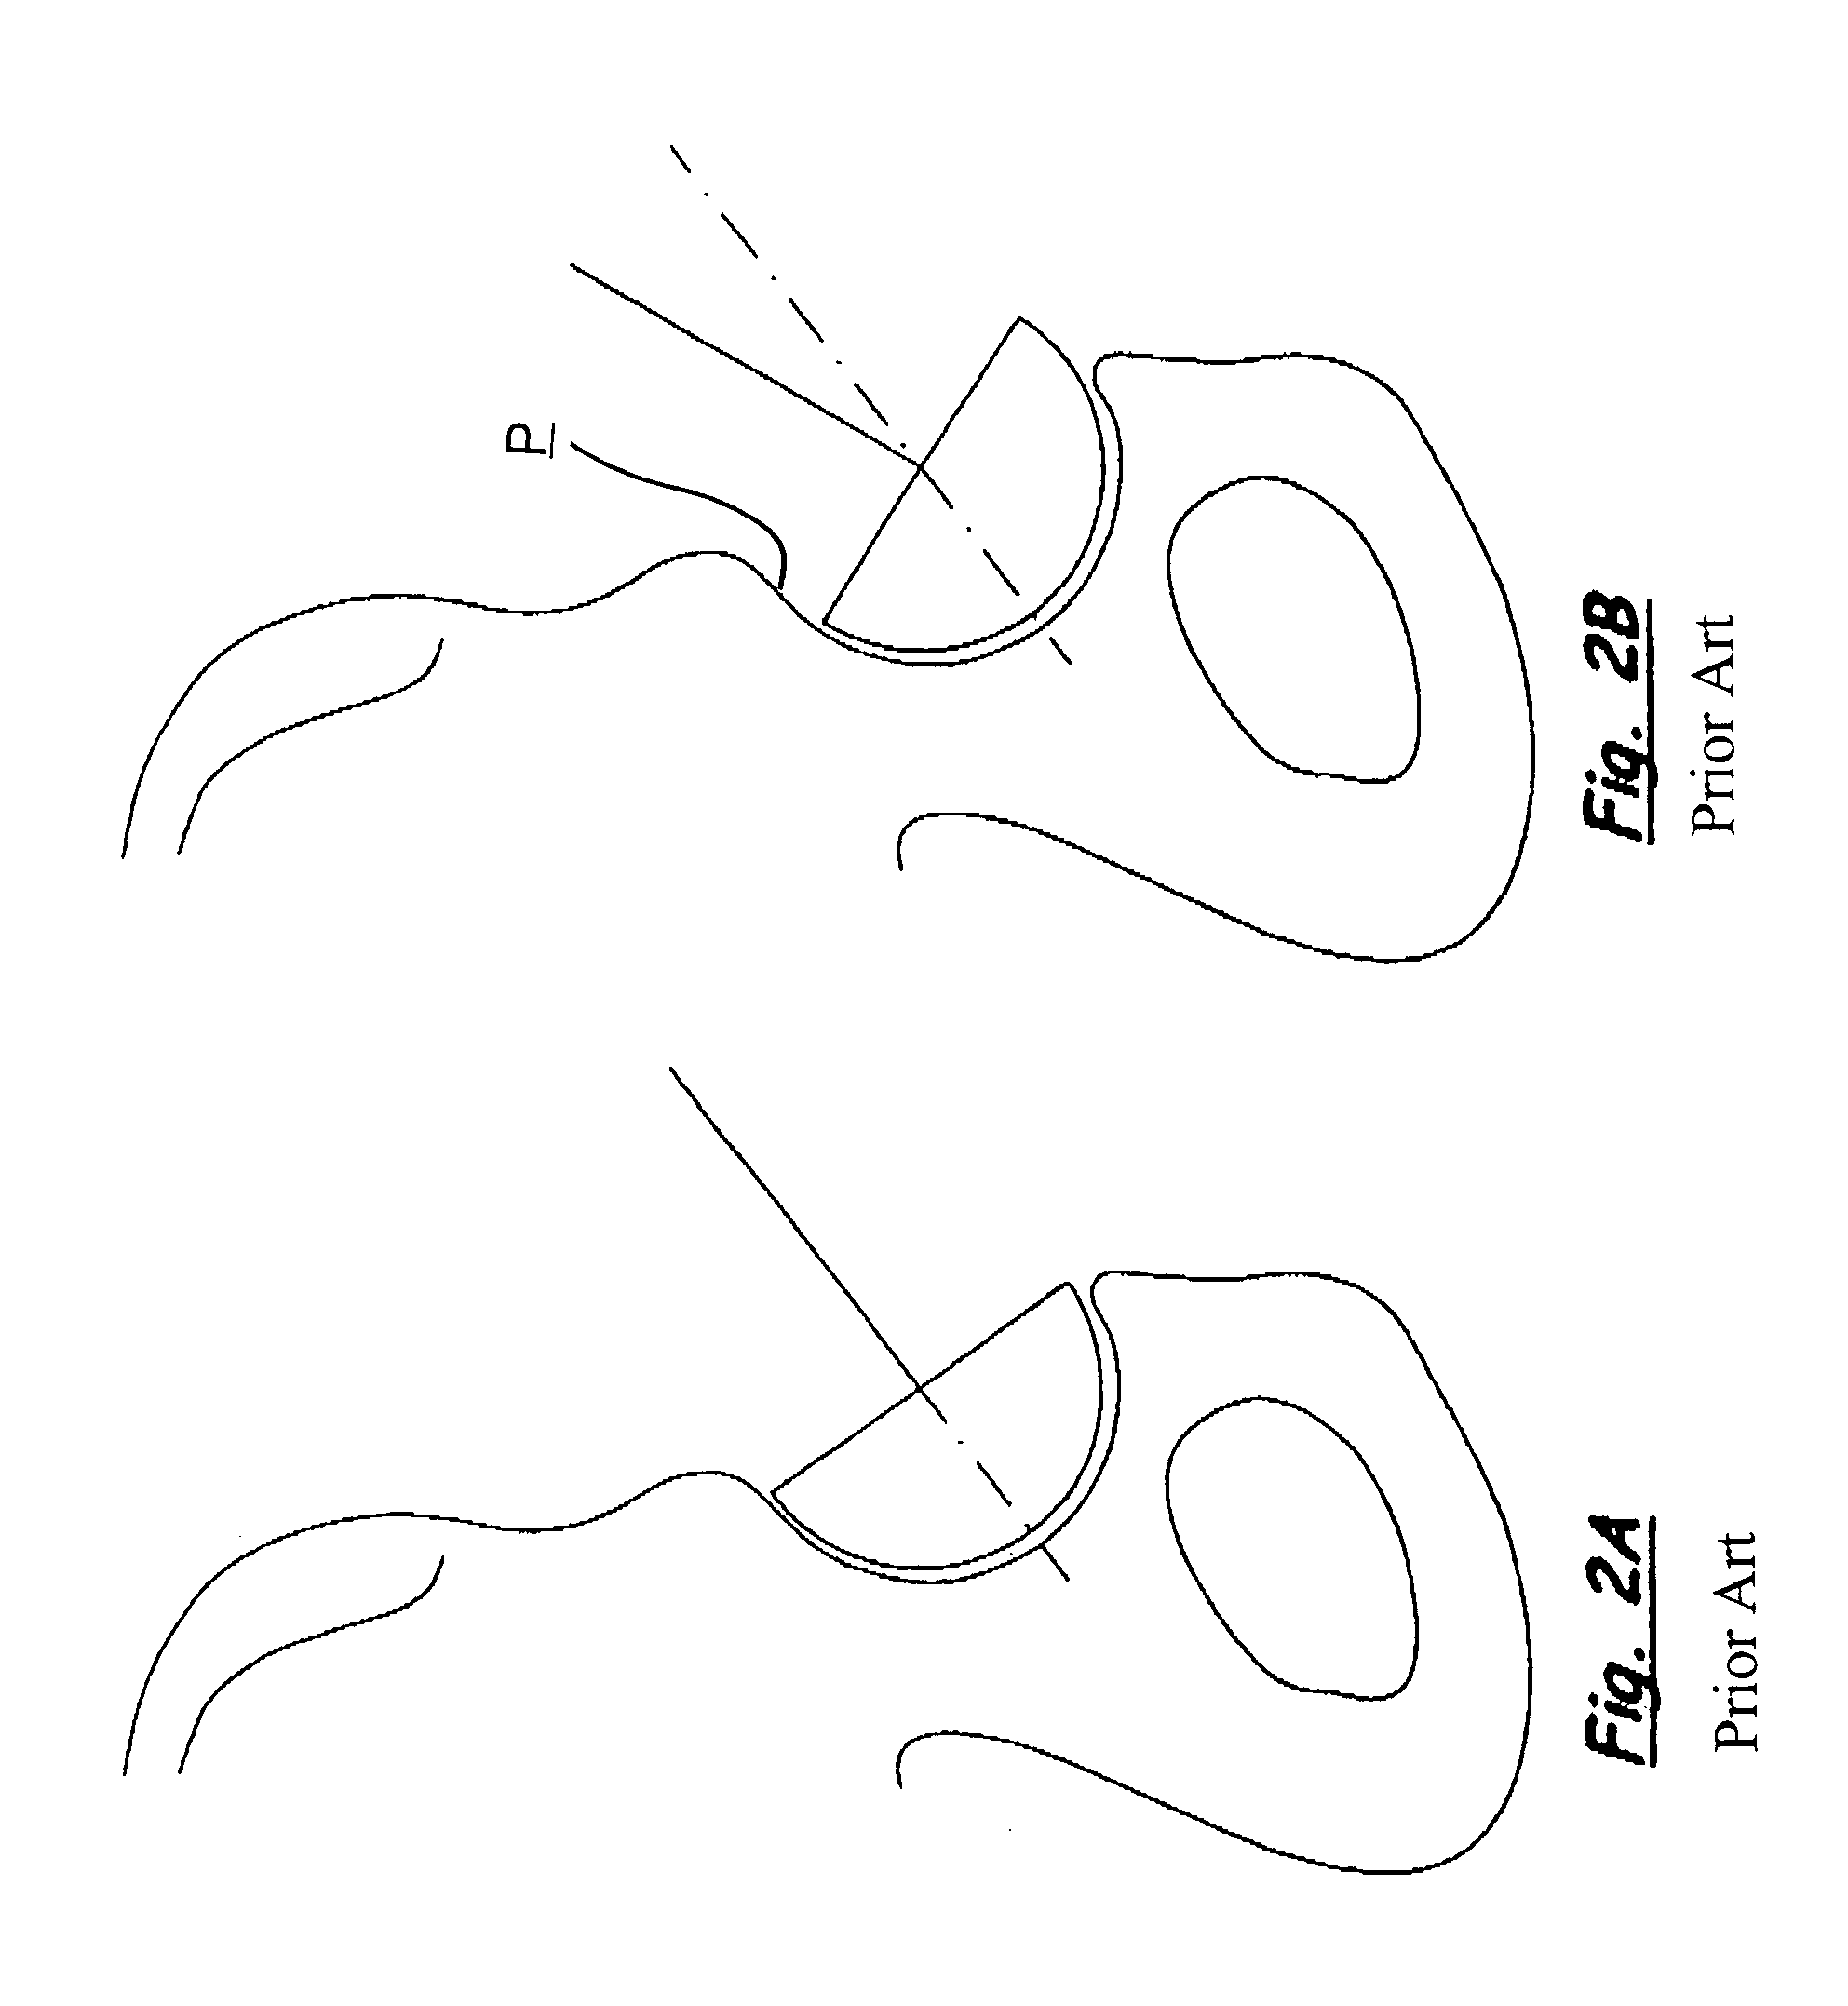 Expandable surgical reaming tool